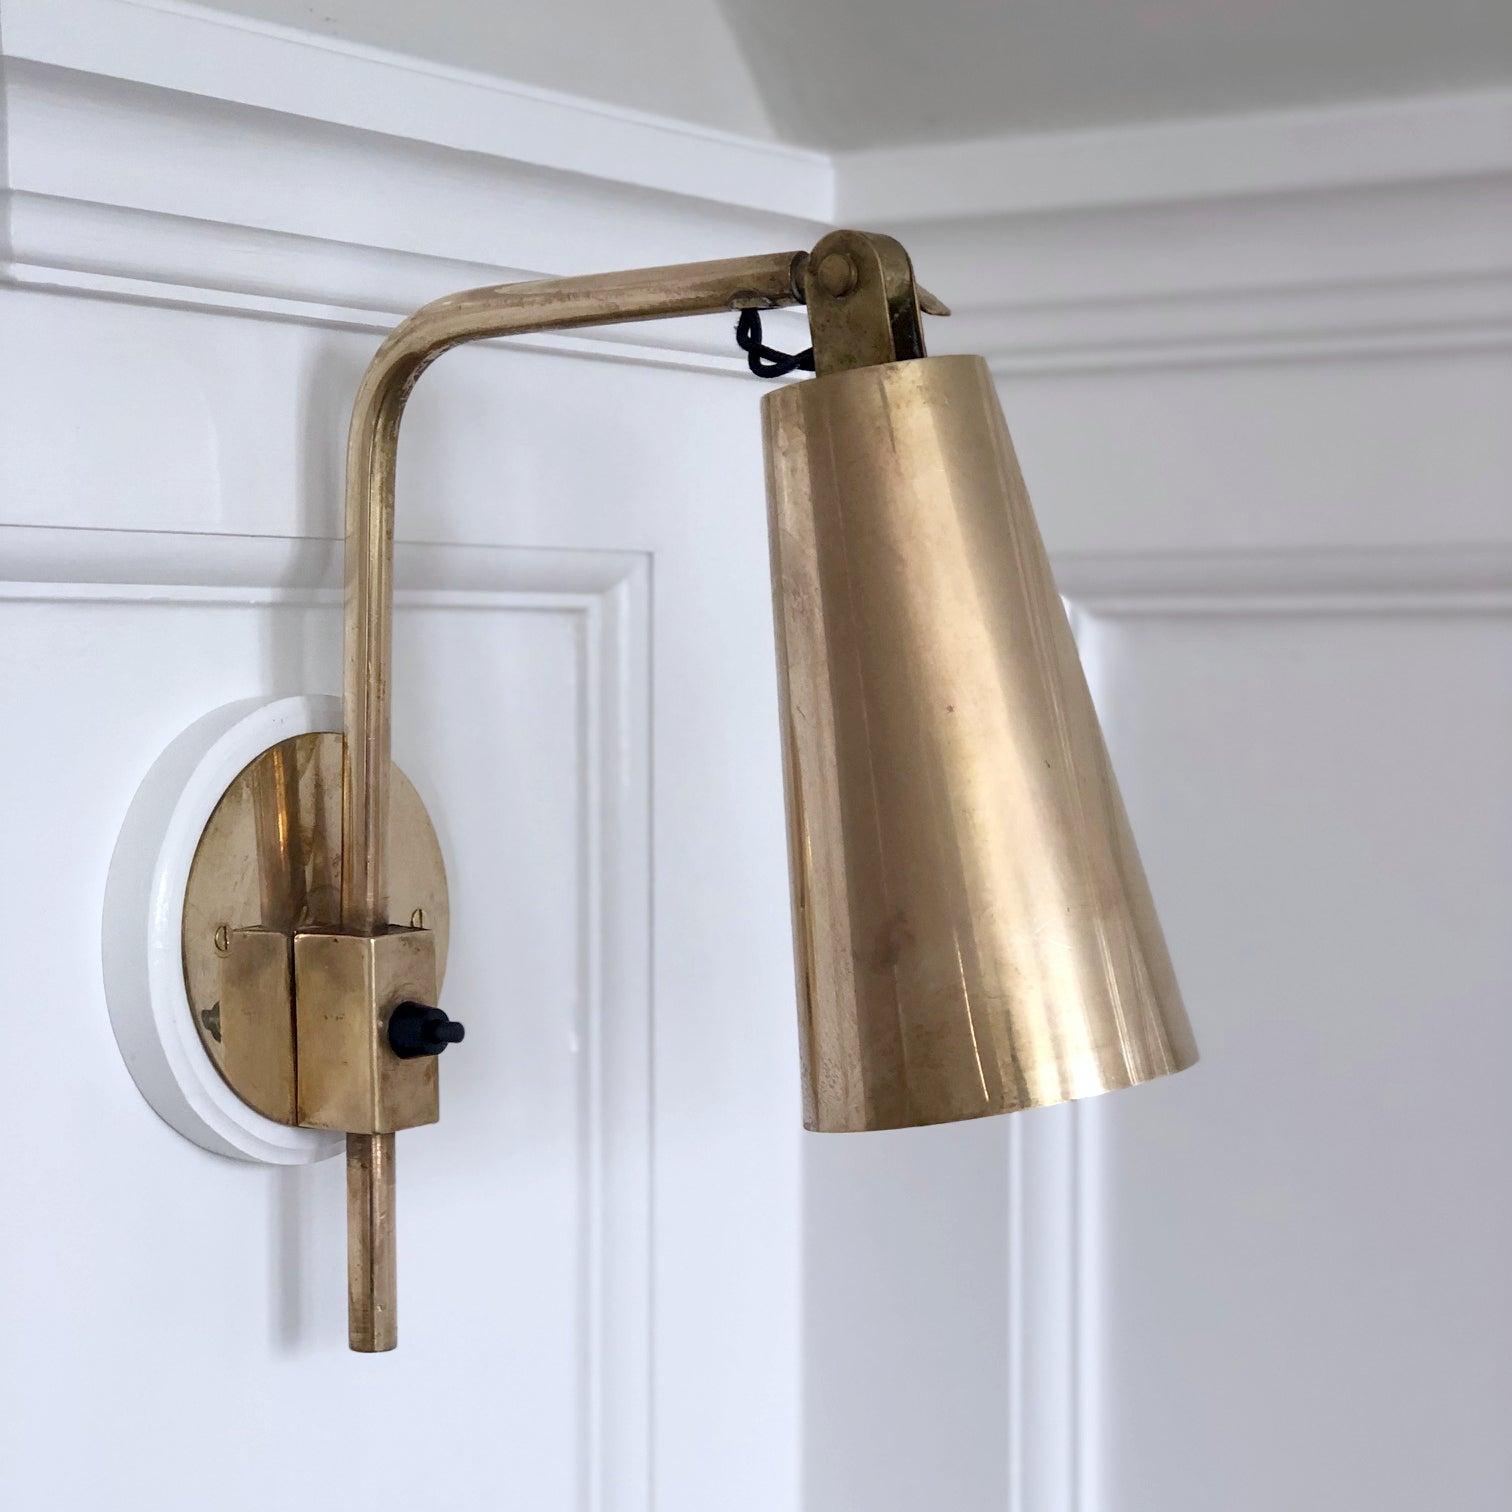 Paavo Tynell & Taito Oy, Mid-Century Modern design

Pair of brass vintage wall lights, designer Paavo Tynell and manufacturer Taito Oy. 

Provenance: Hotel Vaakuna in the 1952. 

The lights have been fully restored and rewired, ready for use. They